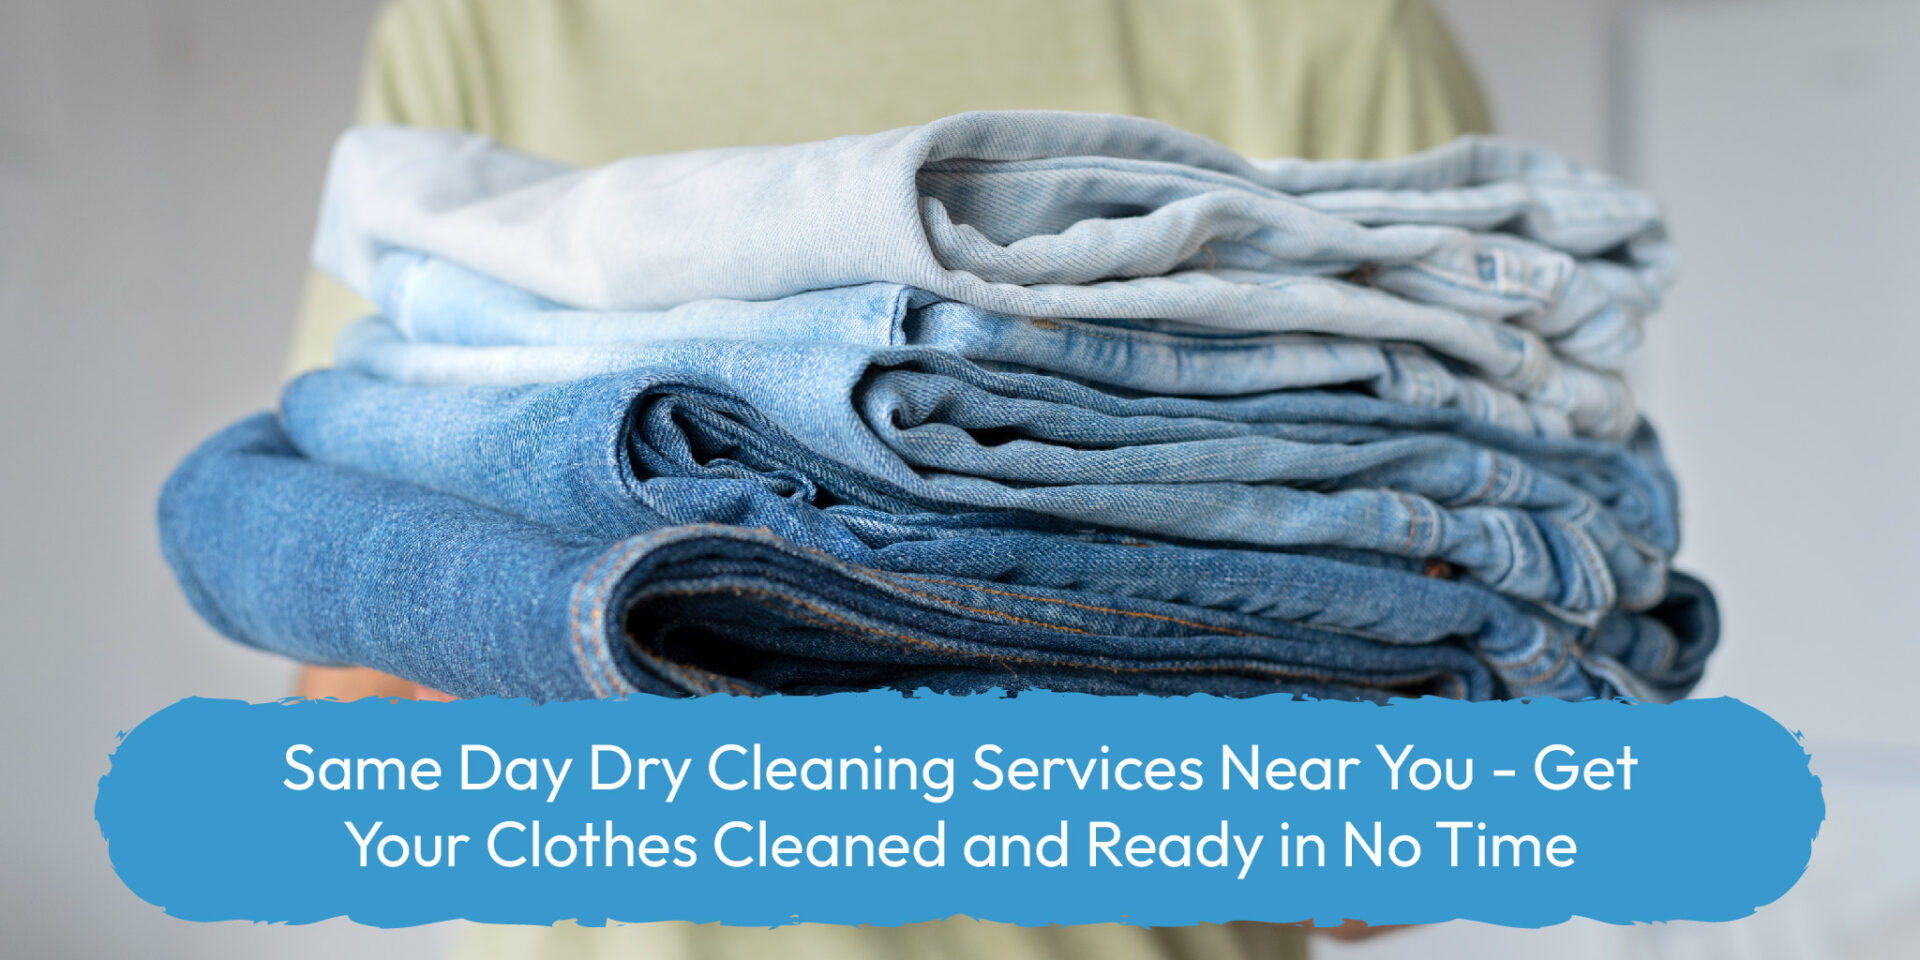 Same Day Dry Cleaning Services Near You Get Your Clothes Cleaned and Ready in No Time- Prime Laundry